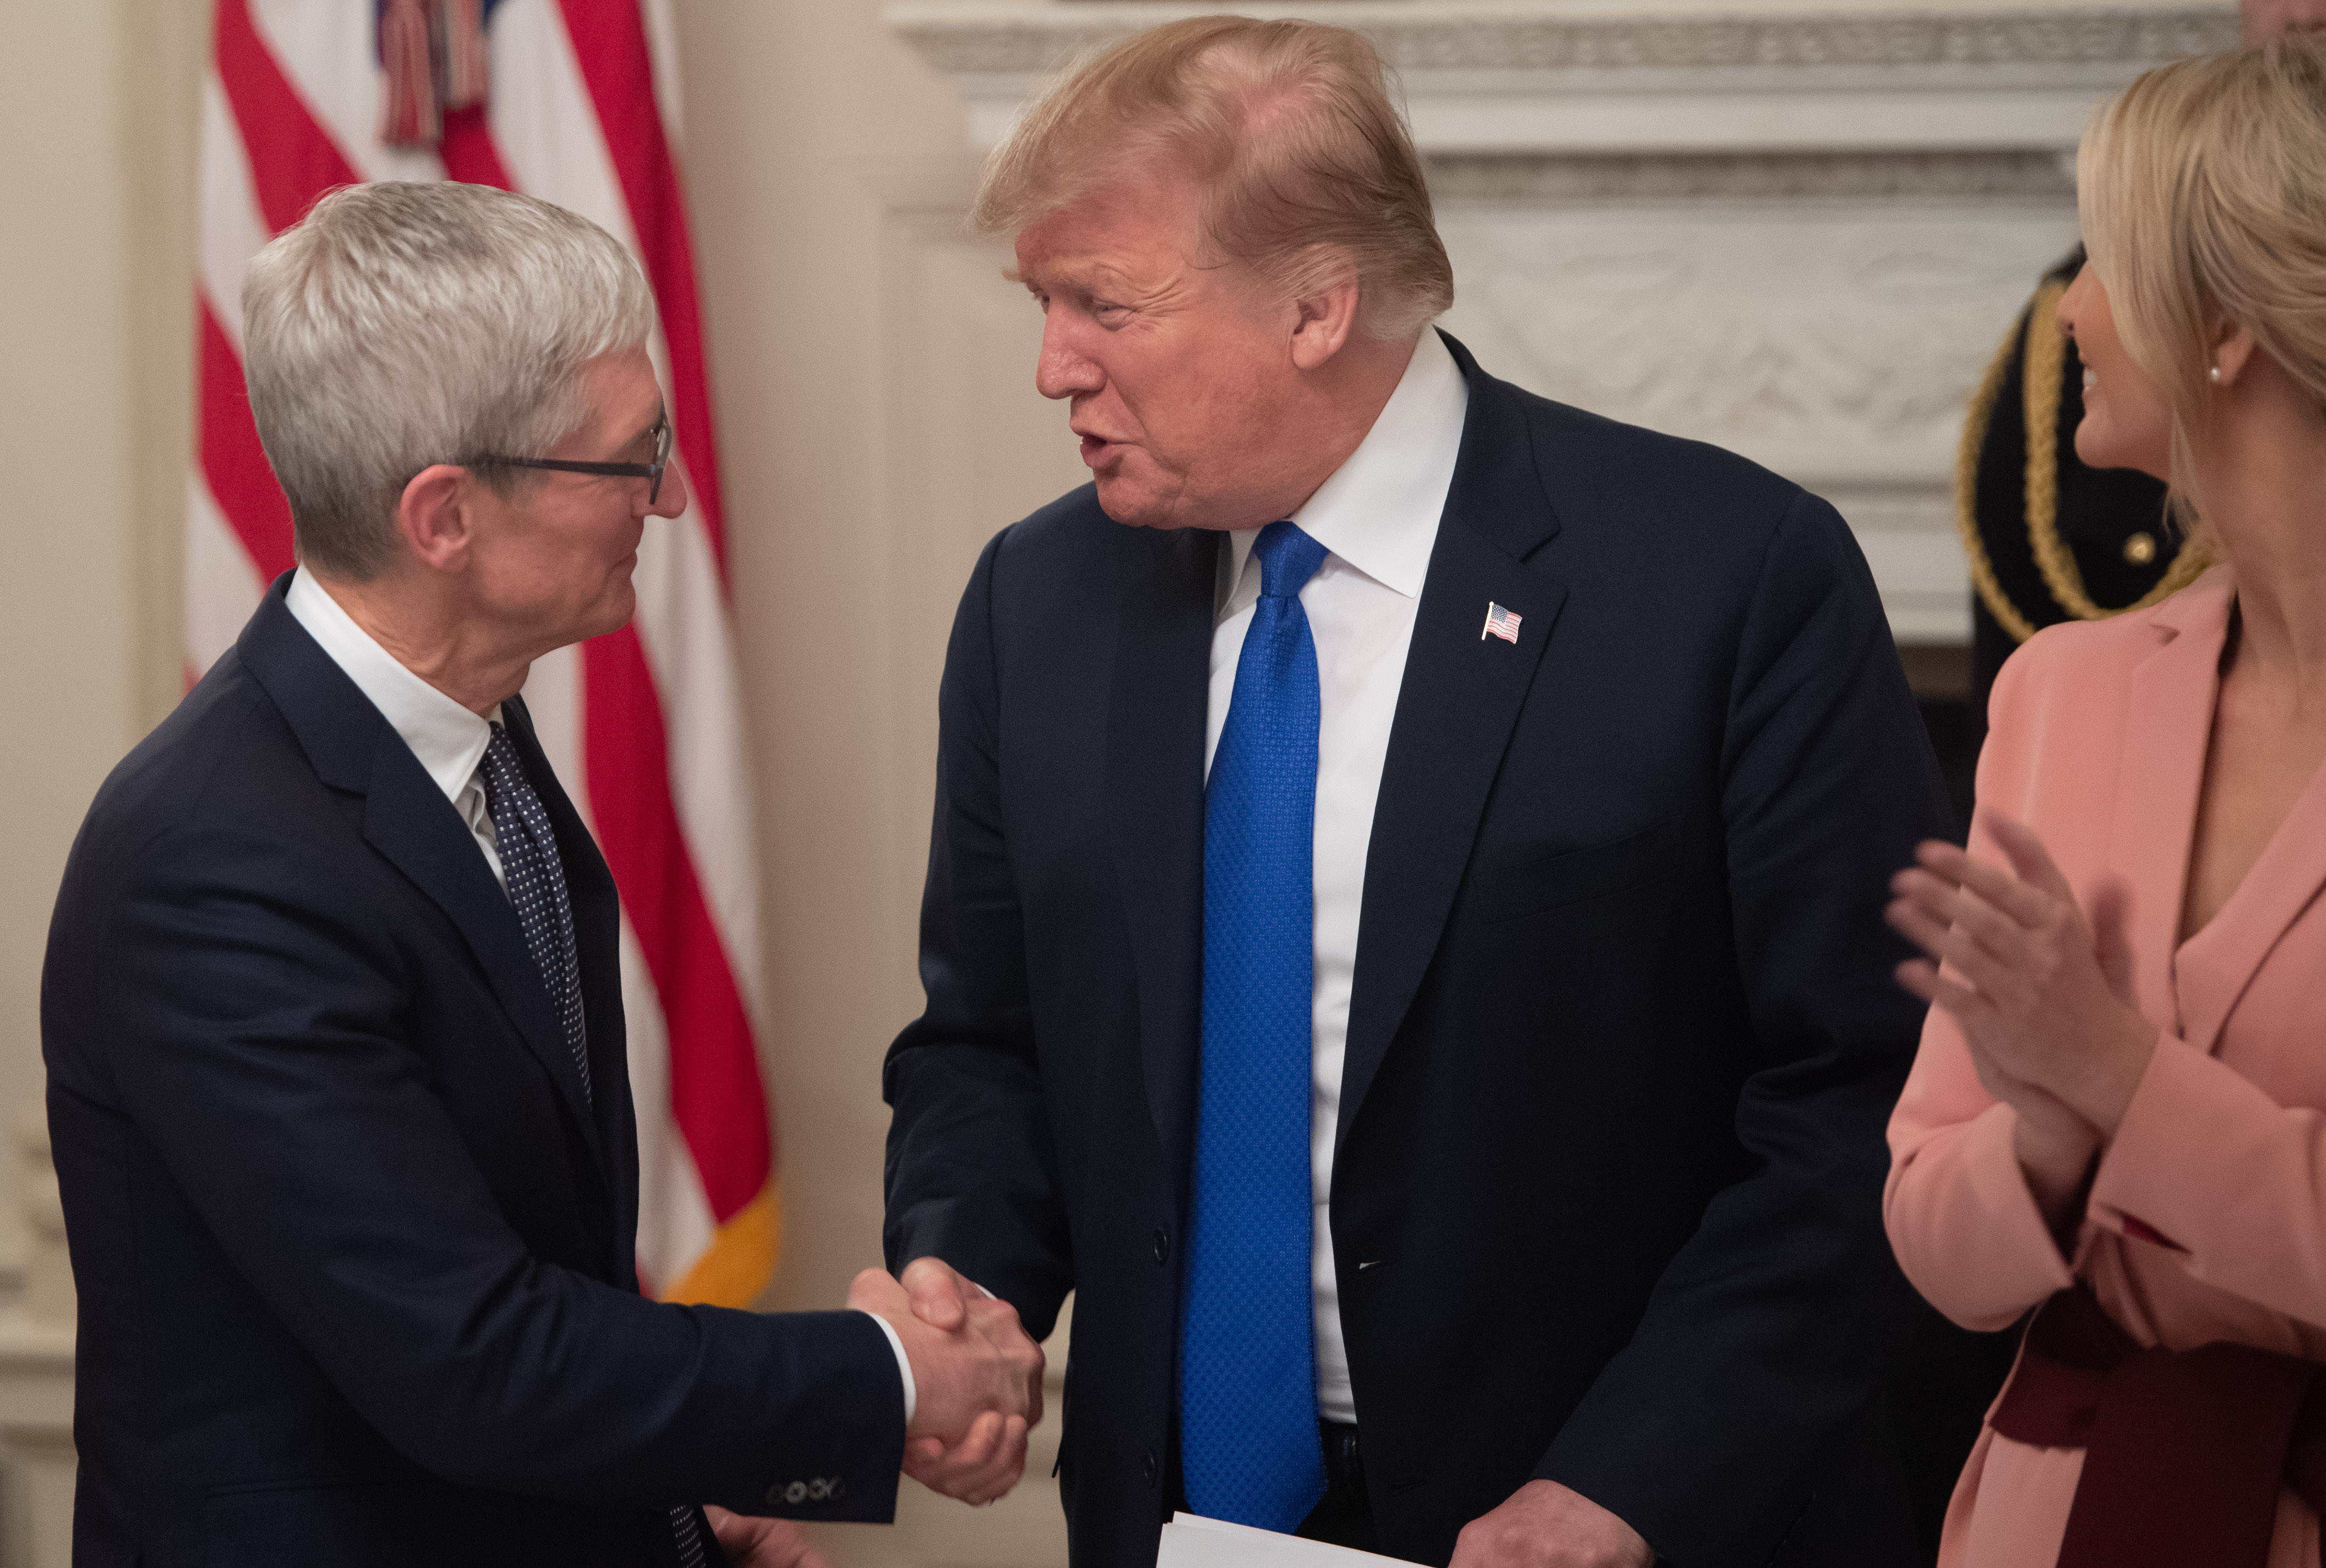 US President Donald Trump shakes hands with Apple CEO Tim Cook (L) during the first meeting of the American Workforce Policy Advisory Board in the State Dining Room of the White House in Washington, DC, March 6, 2019. (SAUL LOEB/AFP/Getty Images)